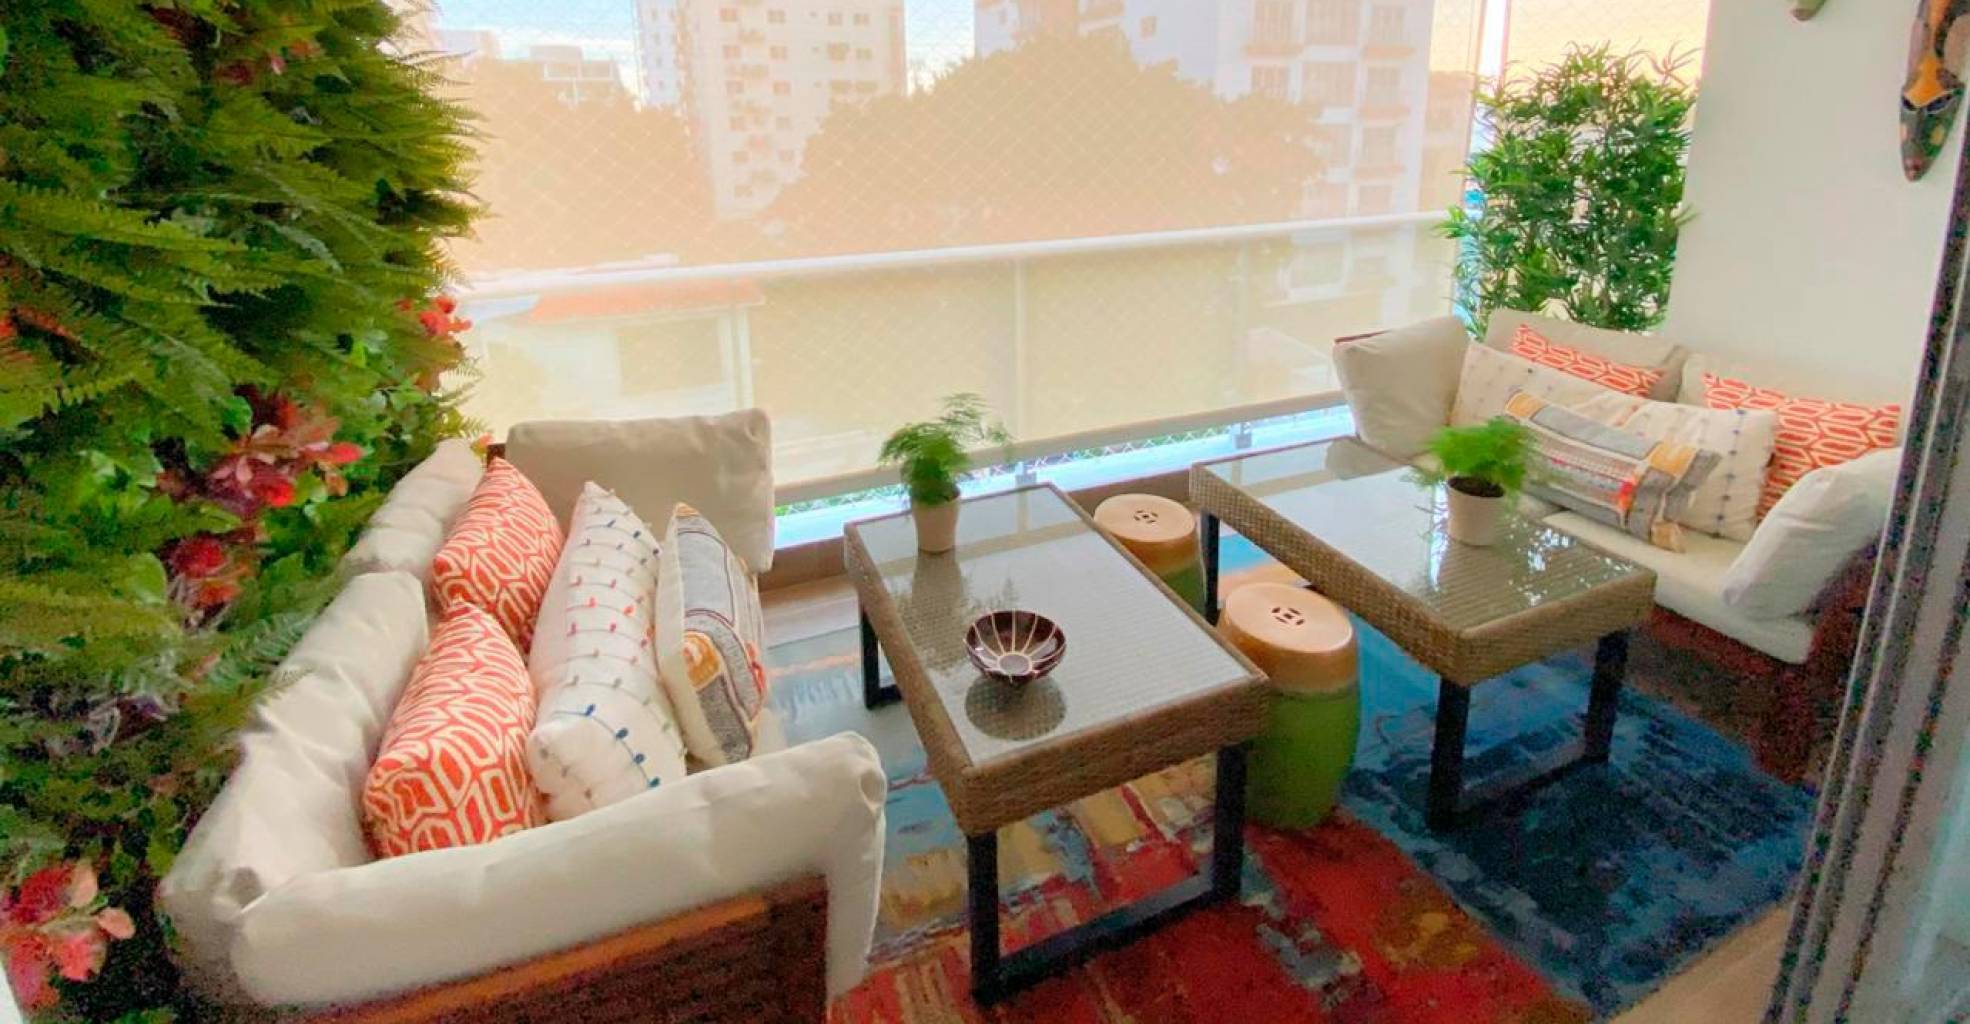 Seven tips for making your balcony a comfortable space